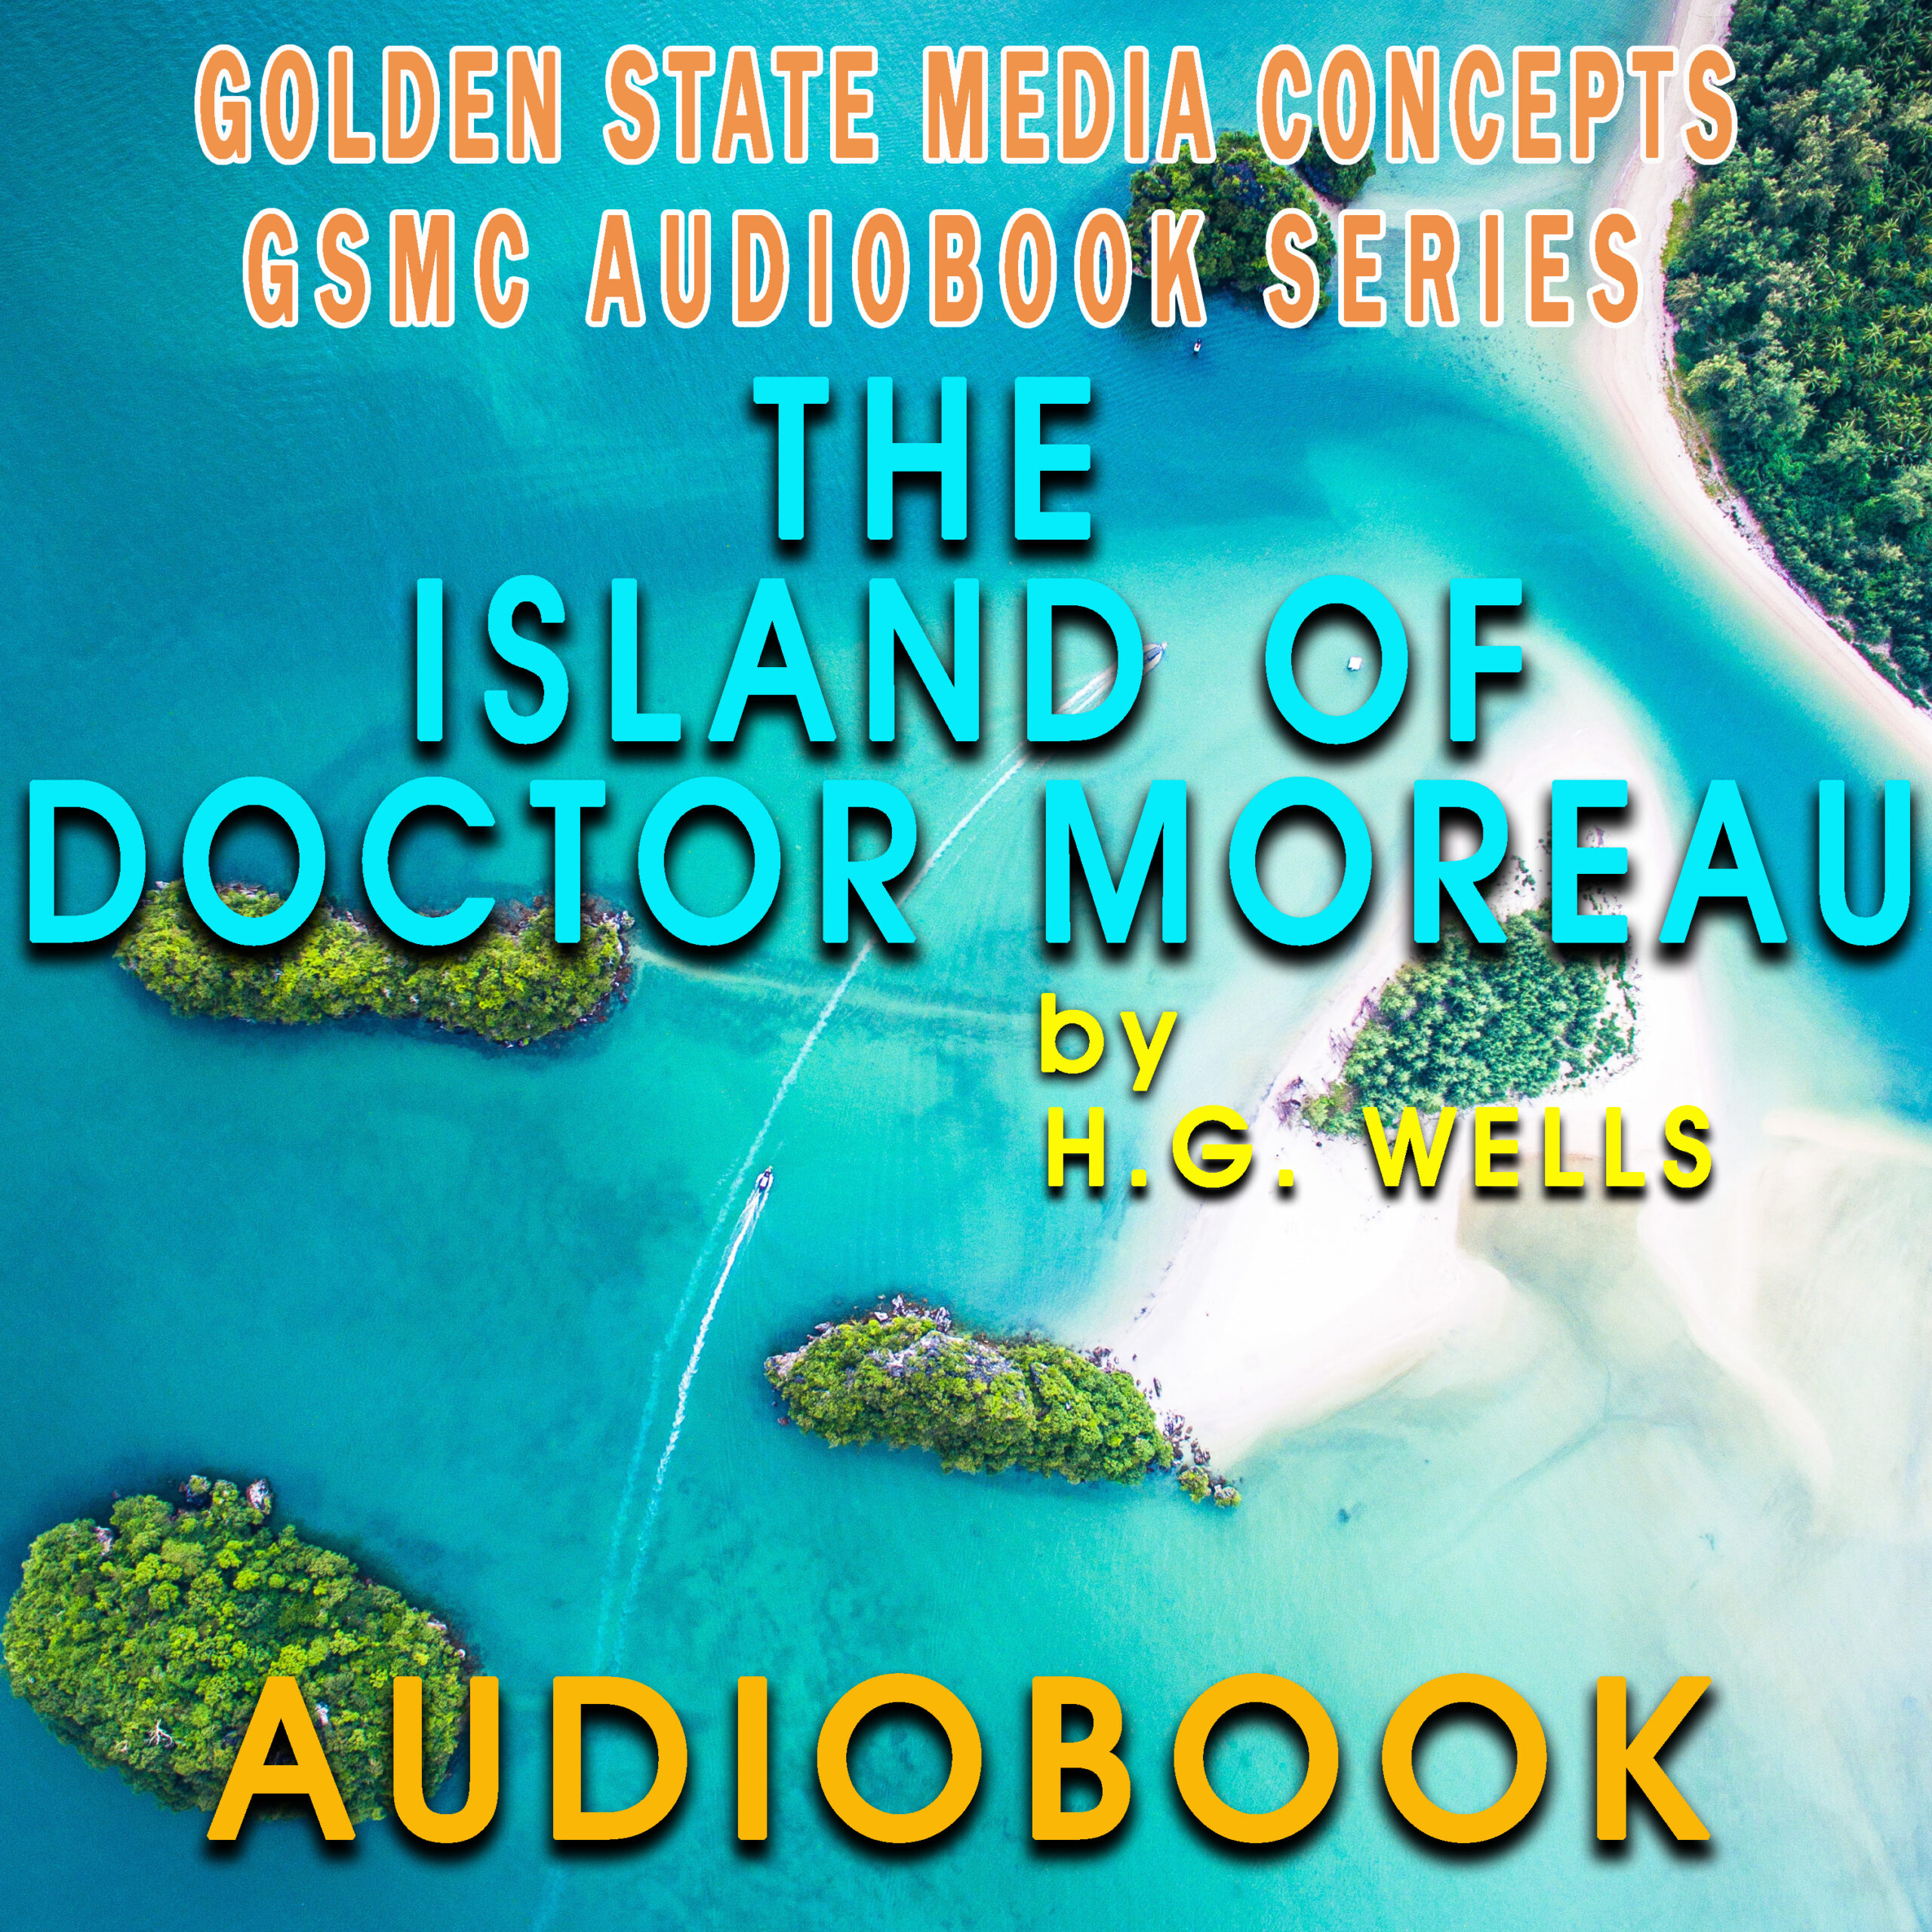 GSMC Audiobook Series: The Island of Doctor Moreau by H.G. Wells